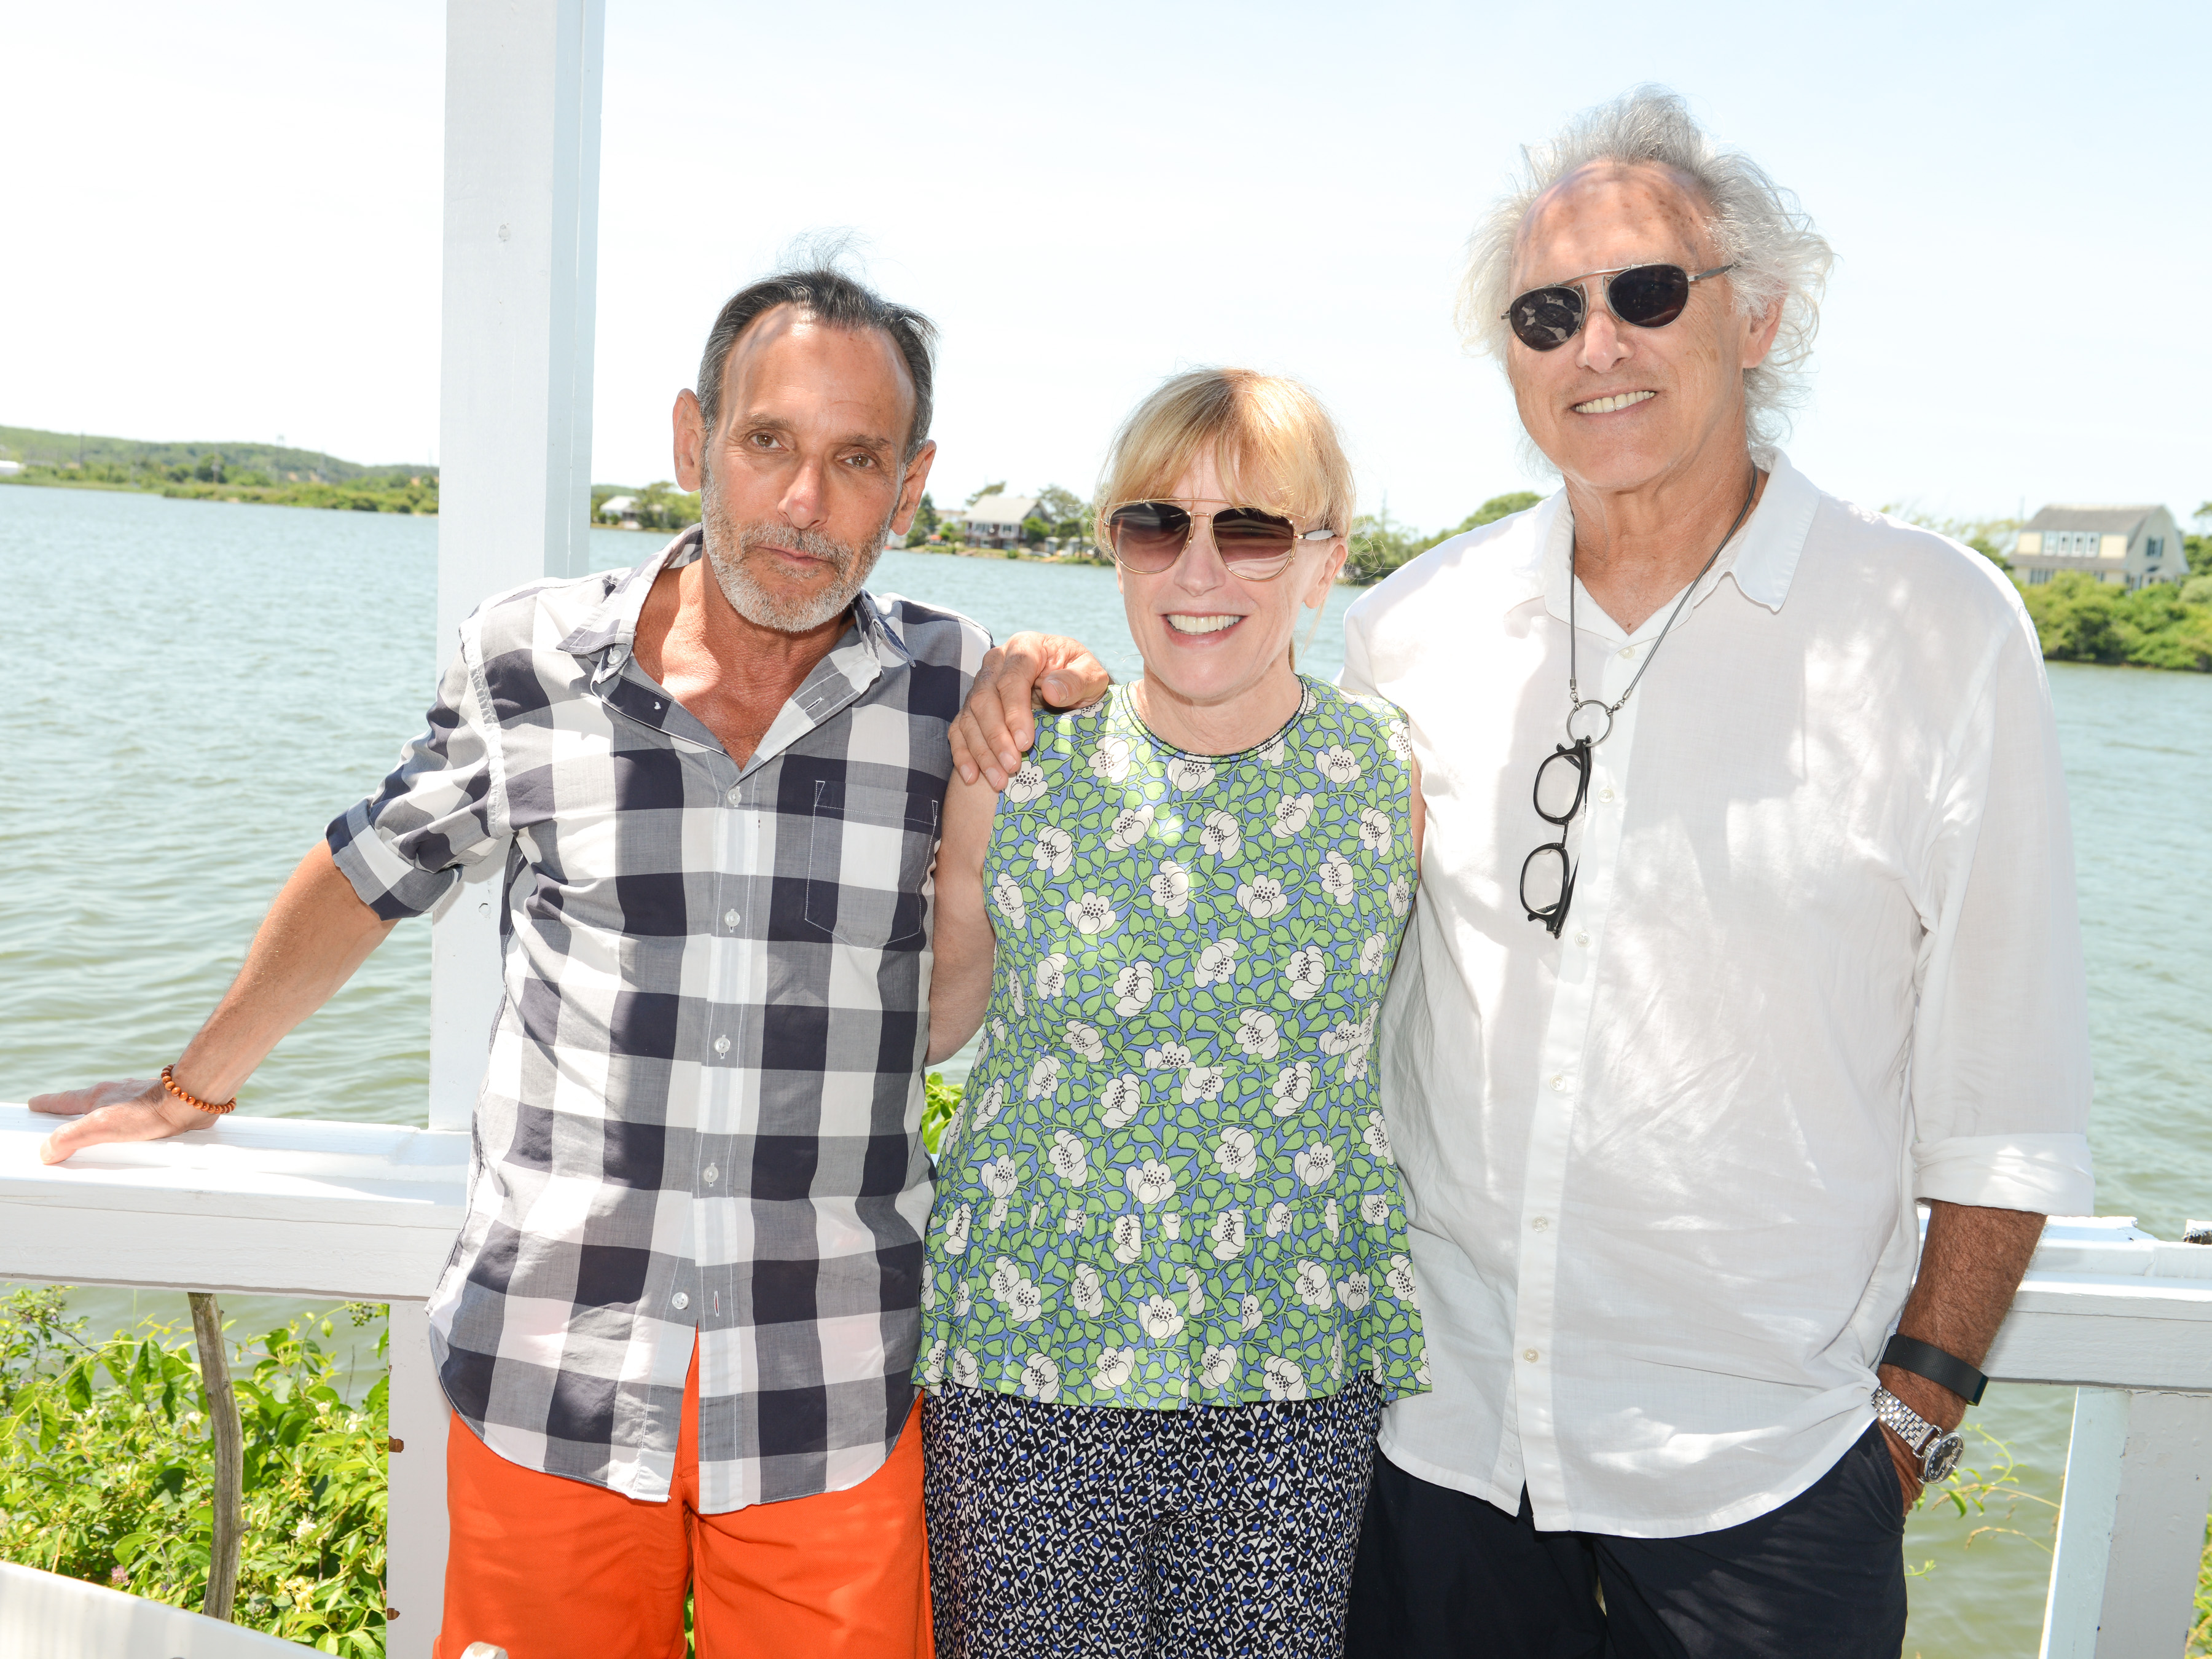 David Salle, Cindy Sherman, and Eric Fischl at the Parrish Art Museum's Contemporaries Circle Brunch at the Surf Lodge. Courtesy of Madison McGaw/BFA.